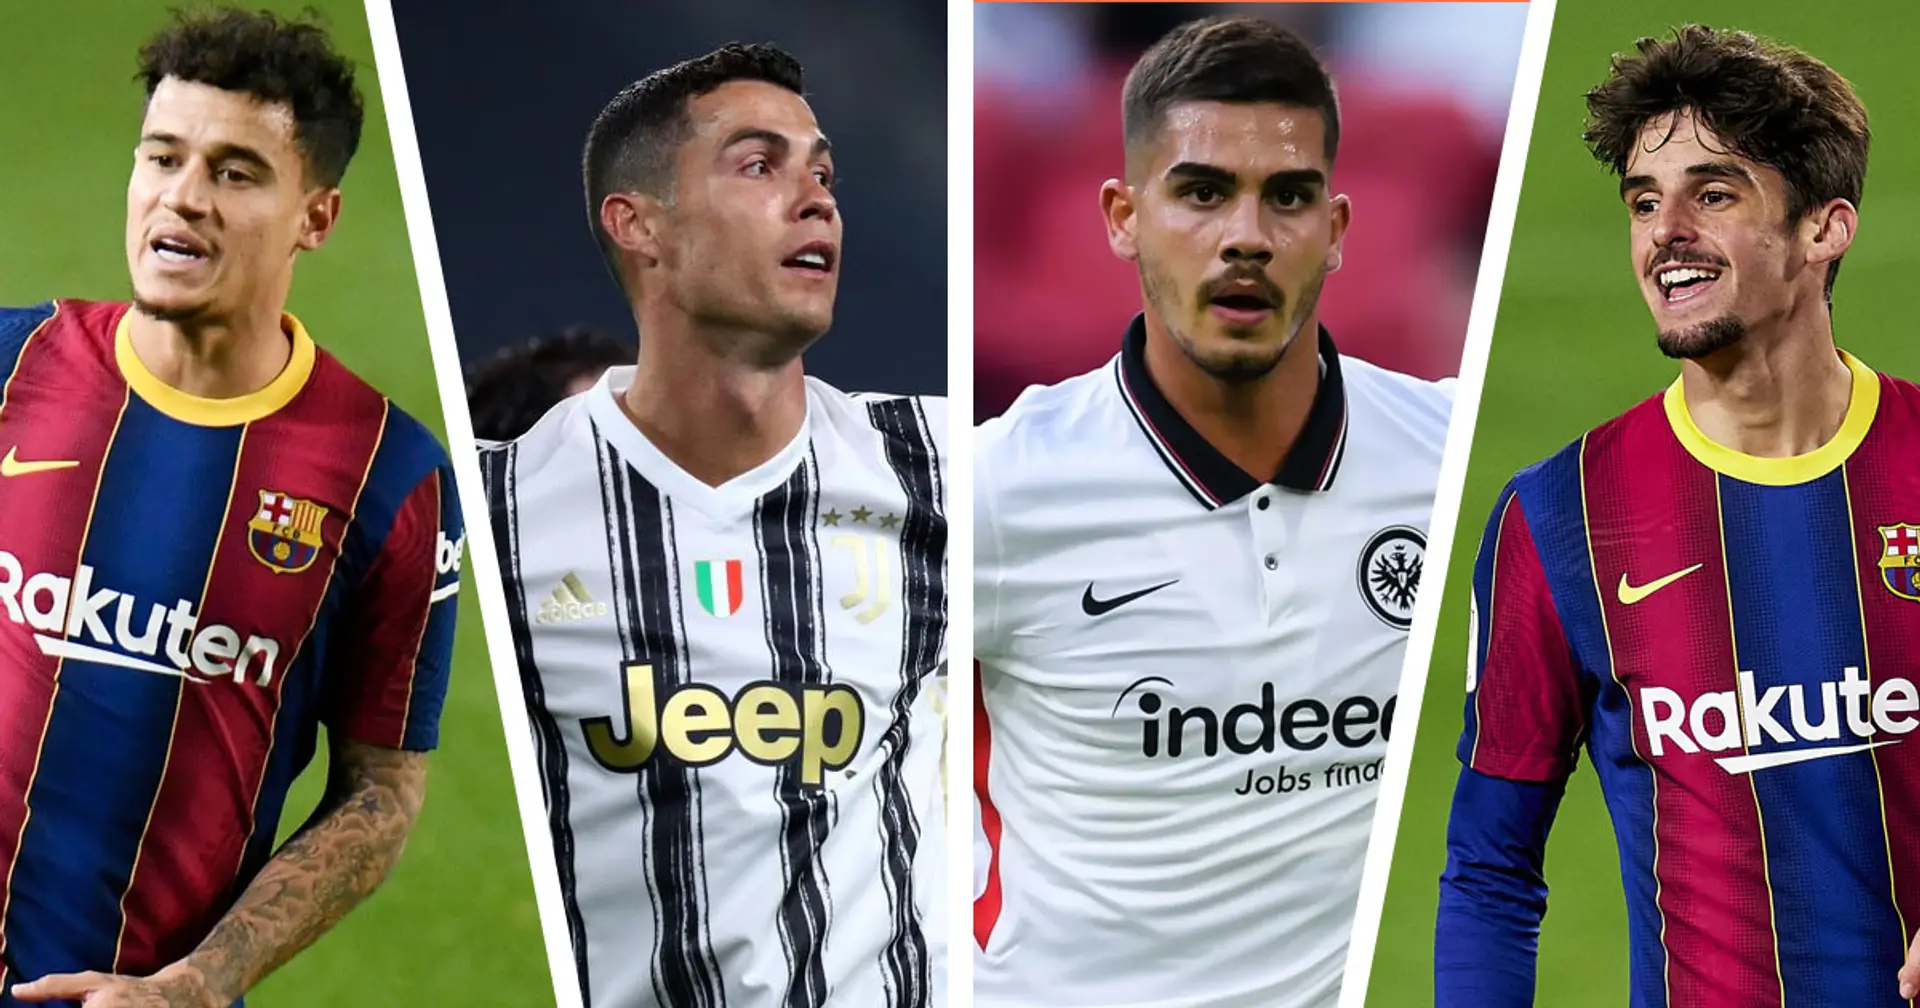 Ronaldo in, Trincao out: 13-name transfer round-up at Barca with probability ratings